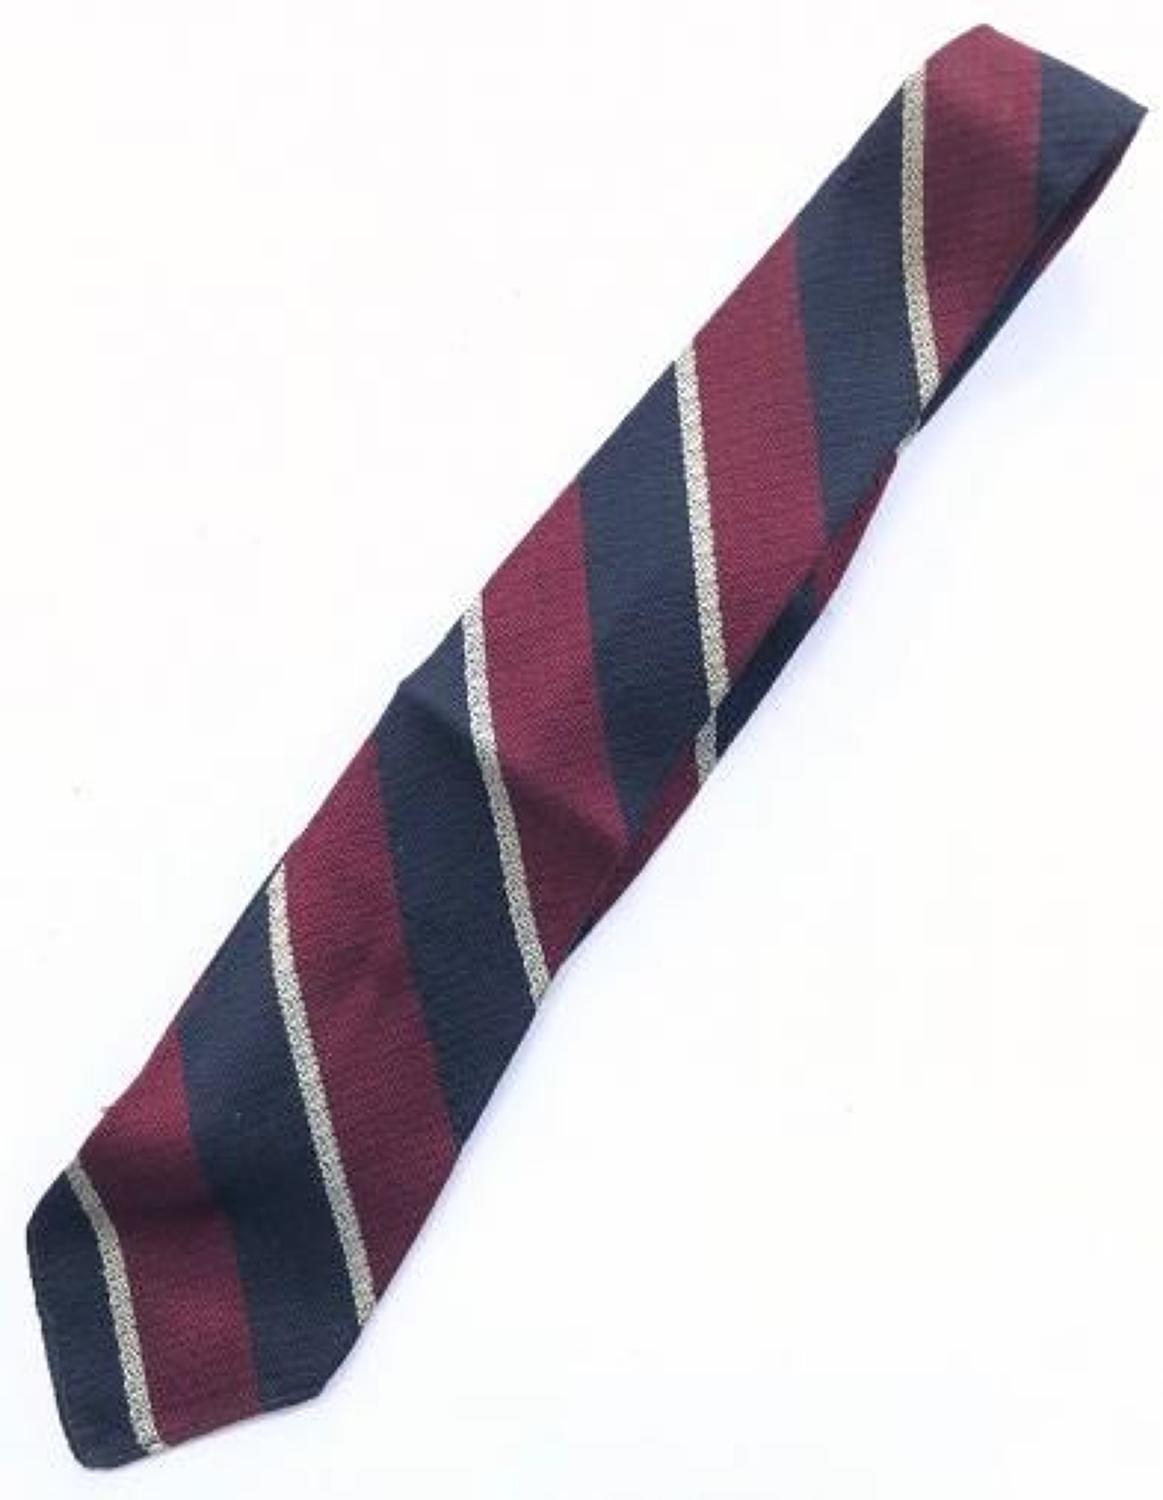 RAF 1940's / 50's Tie Tailored by Harrods of London.